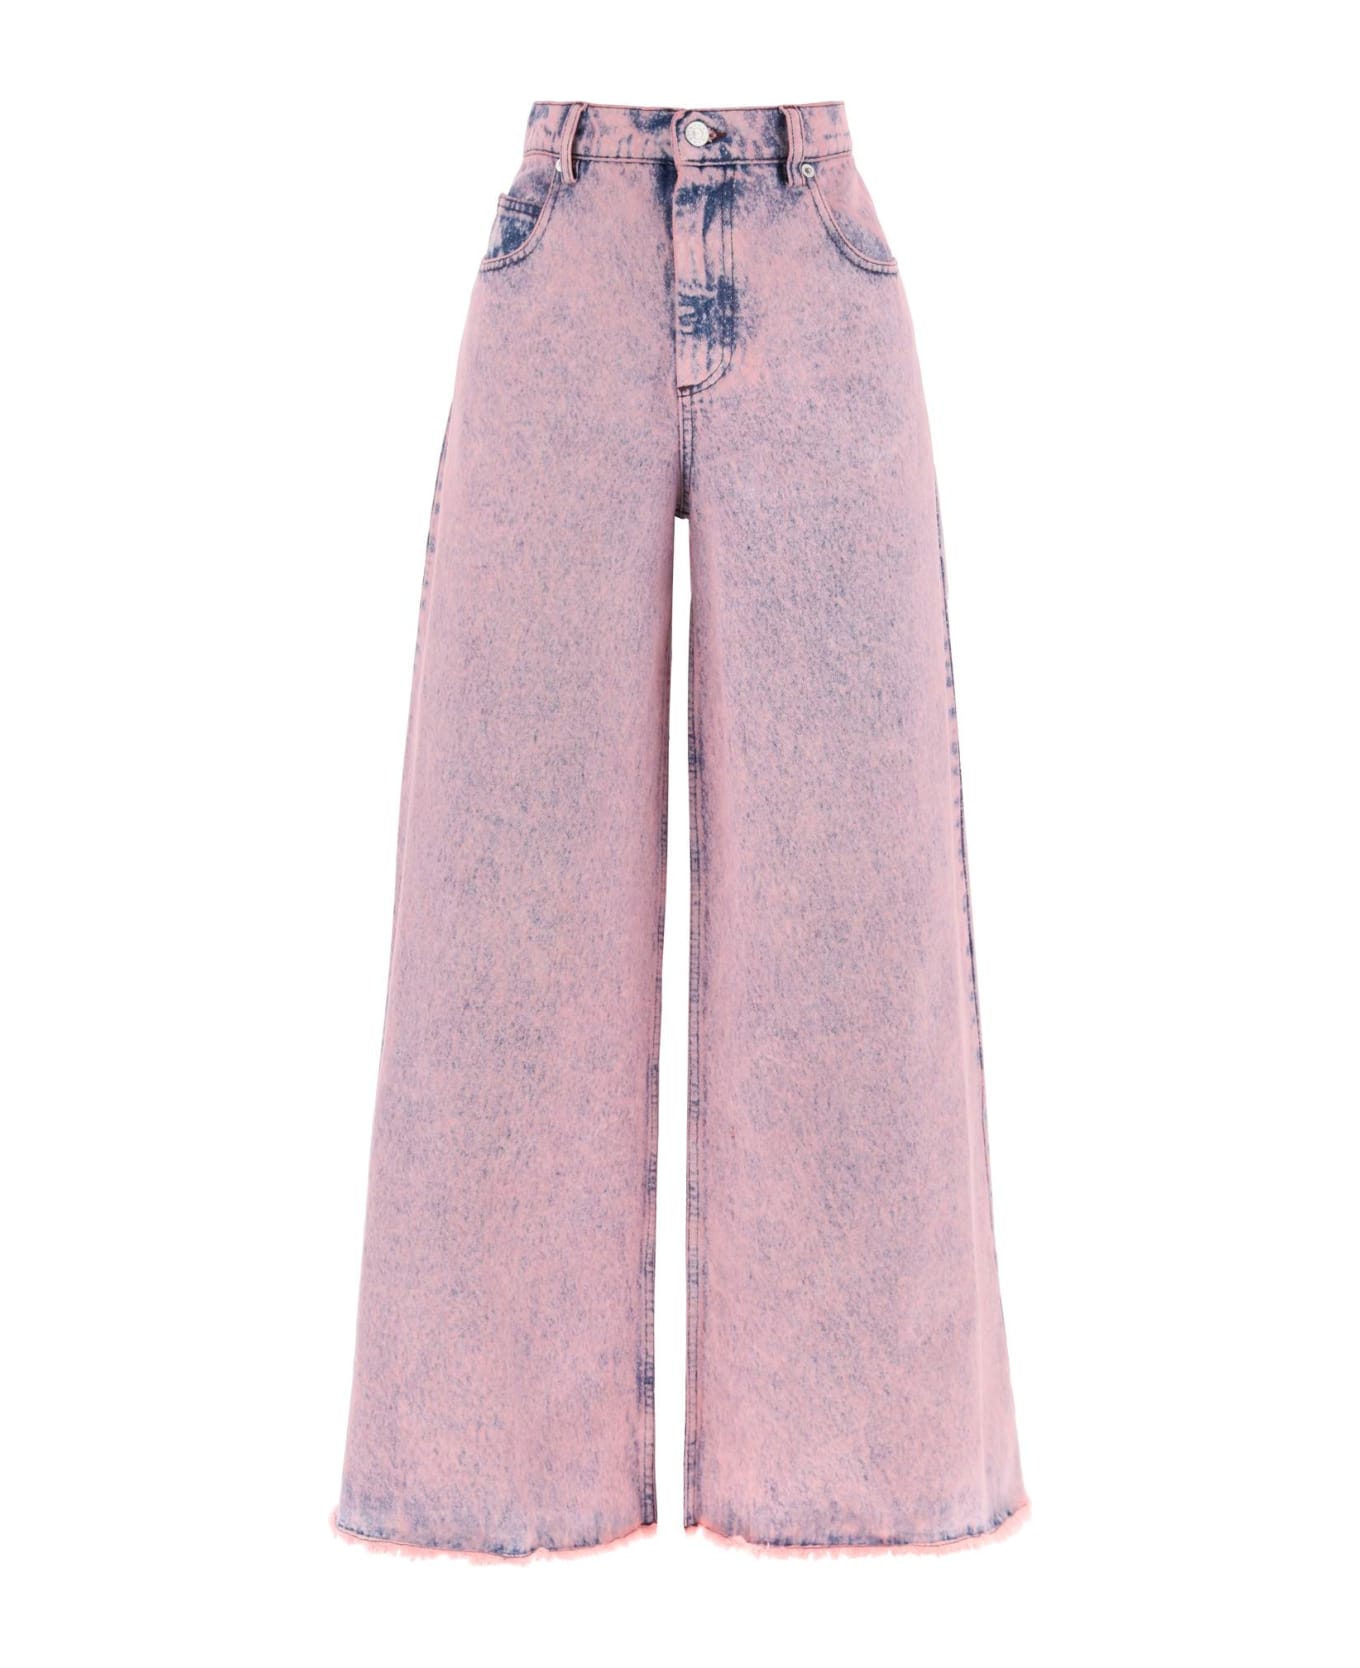 Marni Wide Leg Jeans In Overdyed Denim - PINK GUMMY (Pink)